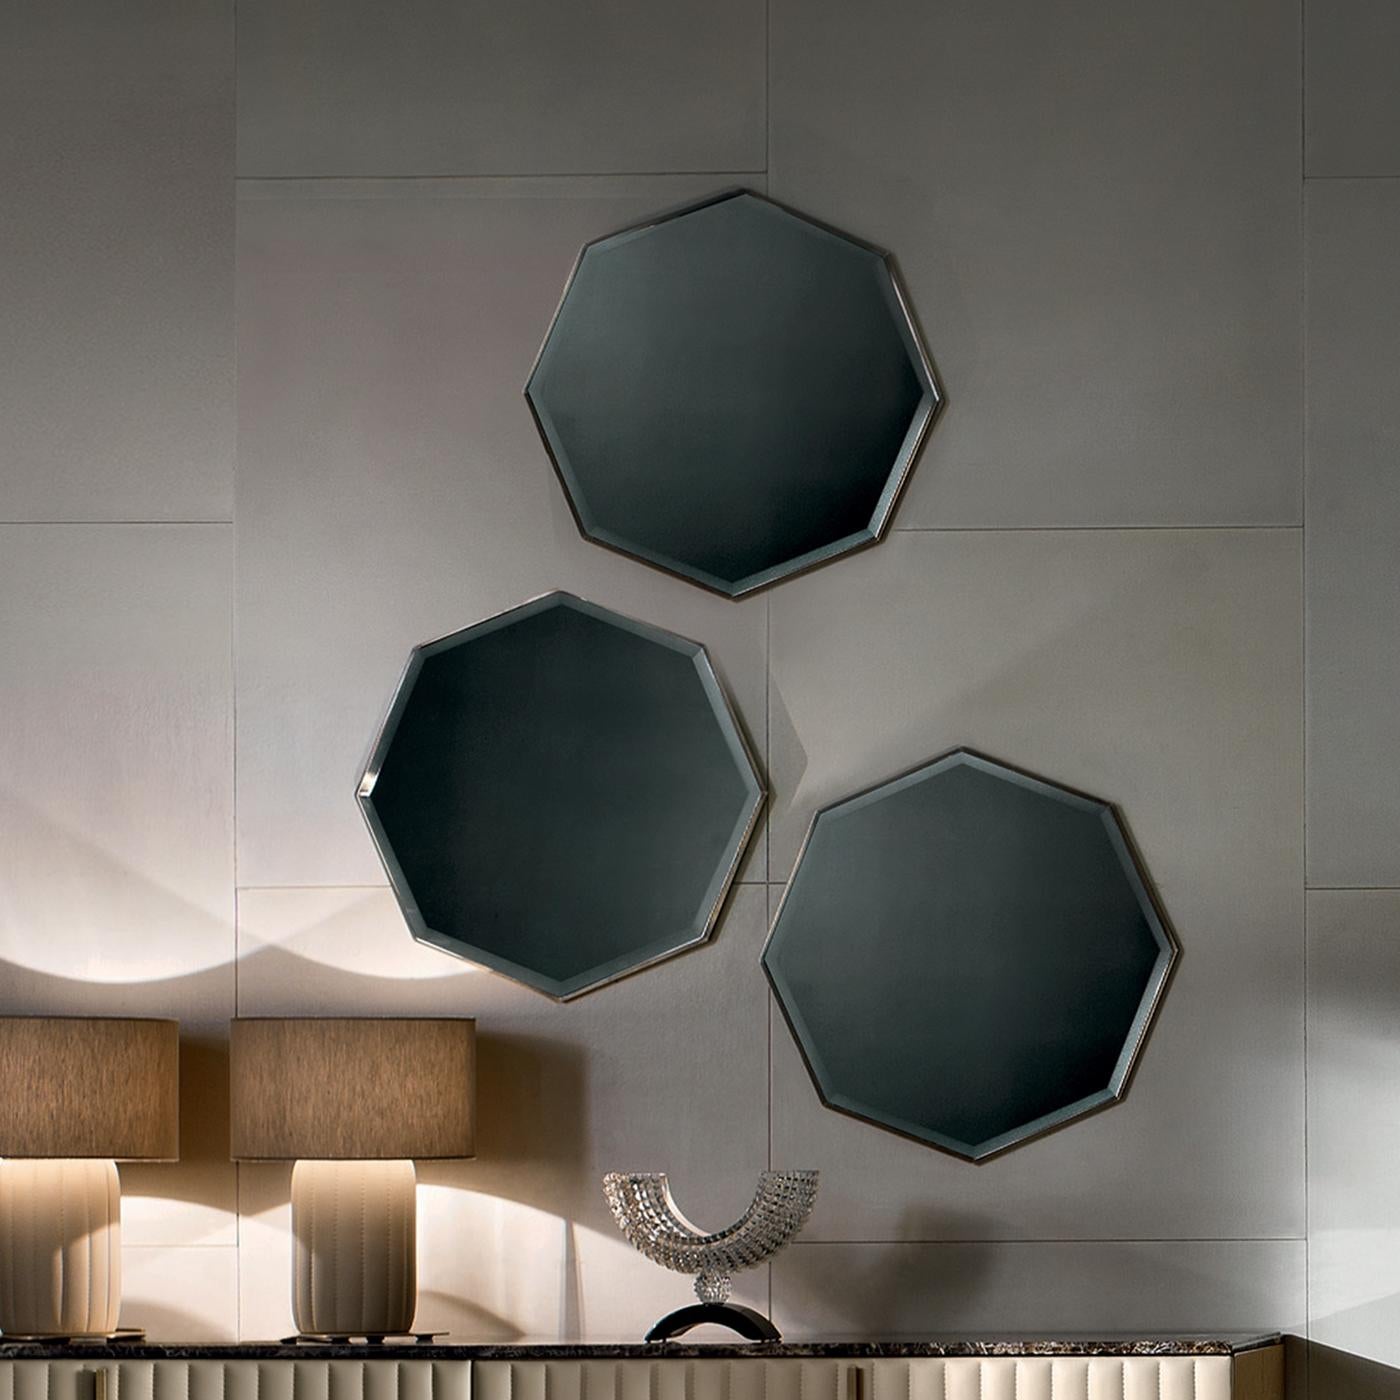 This retro-inspired burnished brass mirror will dress up any wall with a minimalist yet modern feel. Set in a slim and elegant octagonal frame with a subtle and warm brushed finish, this stylish mirror can be placed over a console in an entryway or